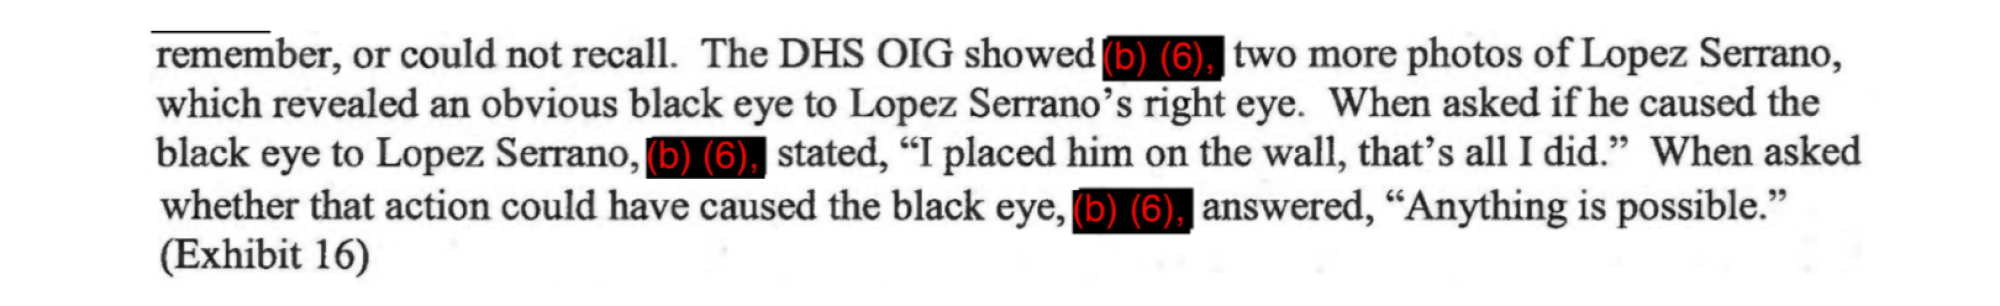 Text from a report shows the federal investigator's questioning of the agent involved in the incident with Lopez